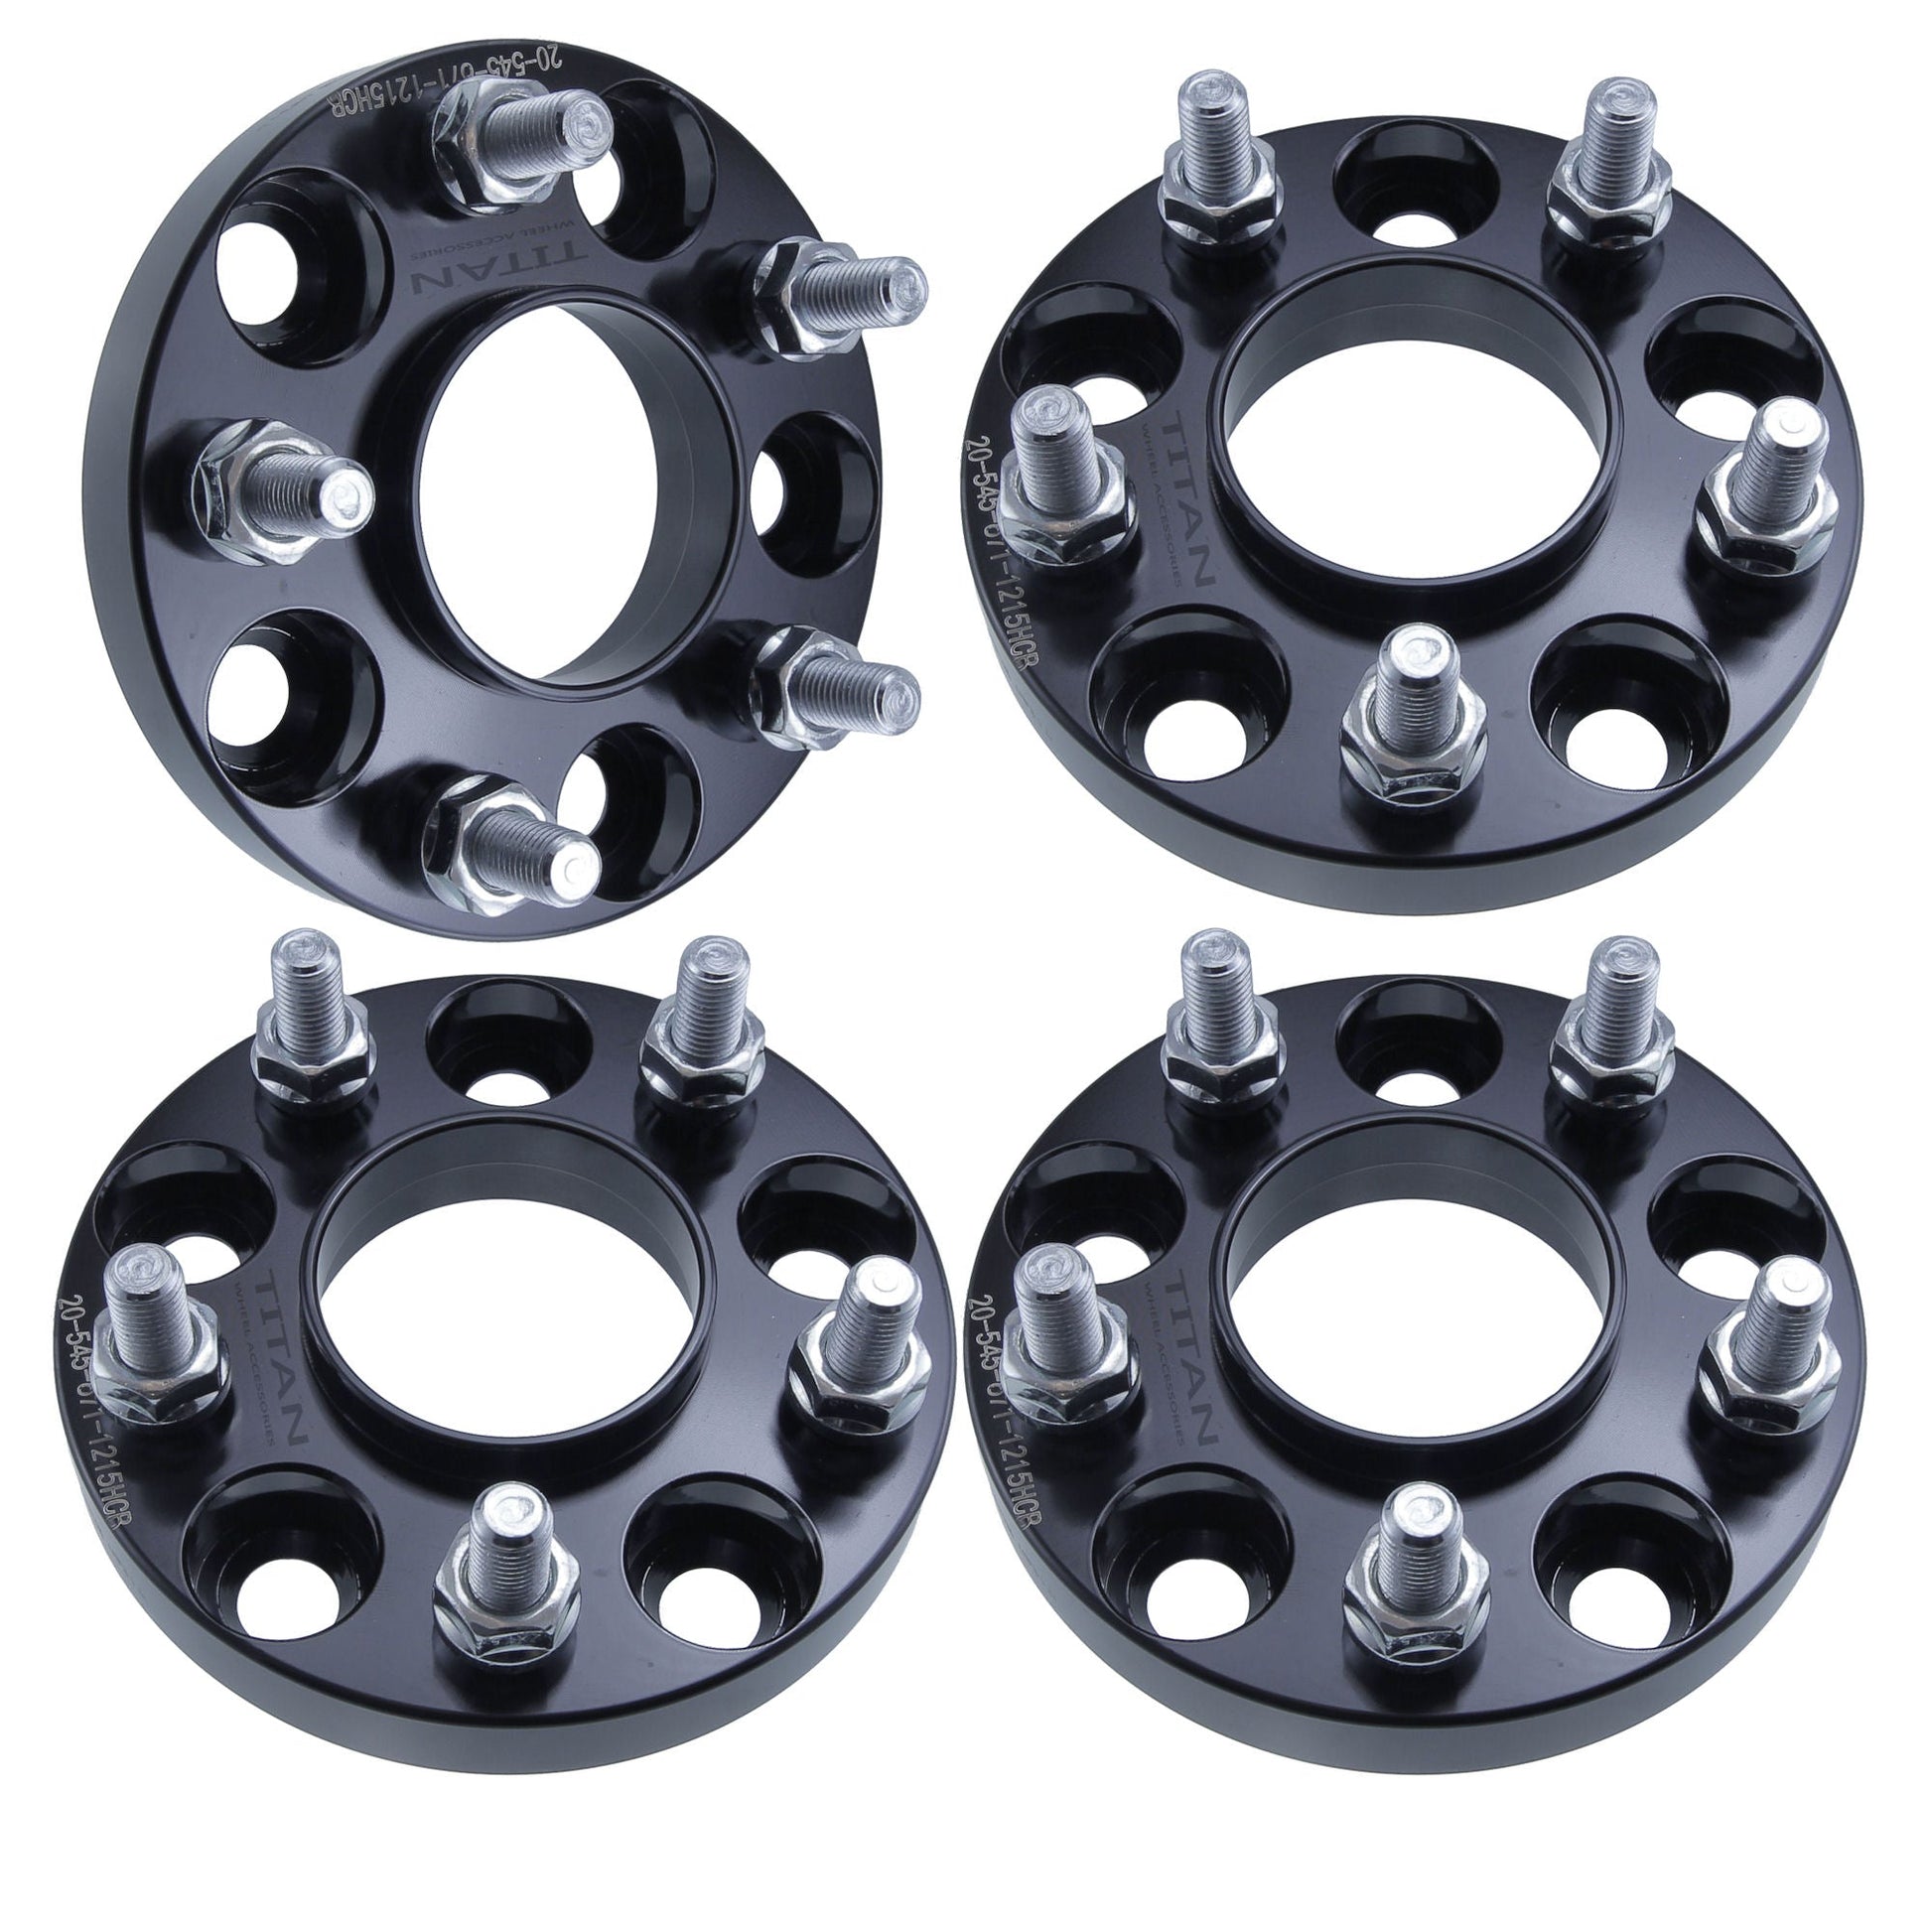 15mm Titan Wheel Spacers for Kia Vehicles Lincoln MKZ Zephyr | 5x114.3 (5x4.5) | 67.1 Hubcentric |12x1.25 Studs |  Set of 4 | Titan Wheel Accessories